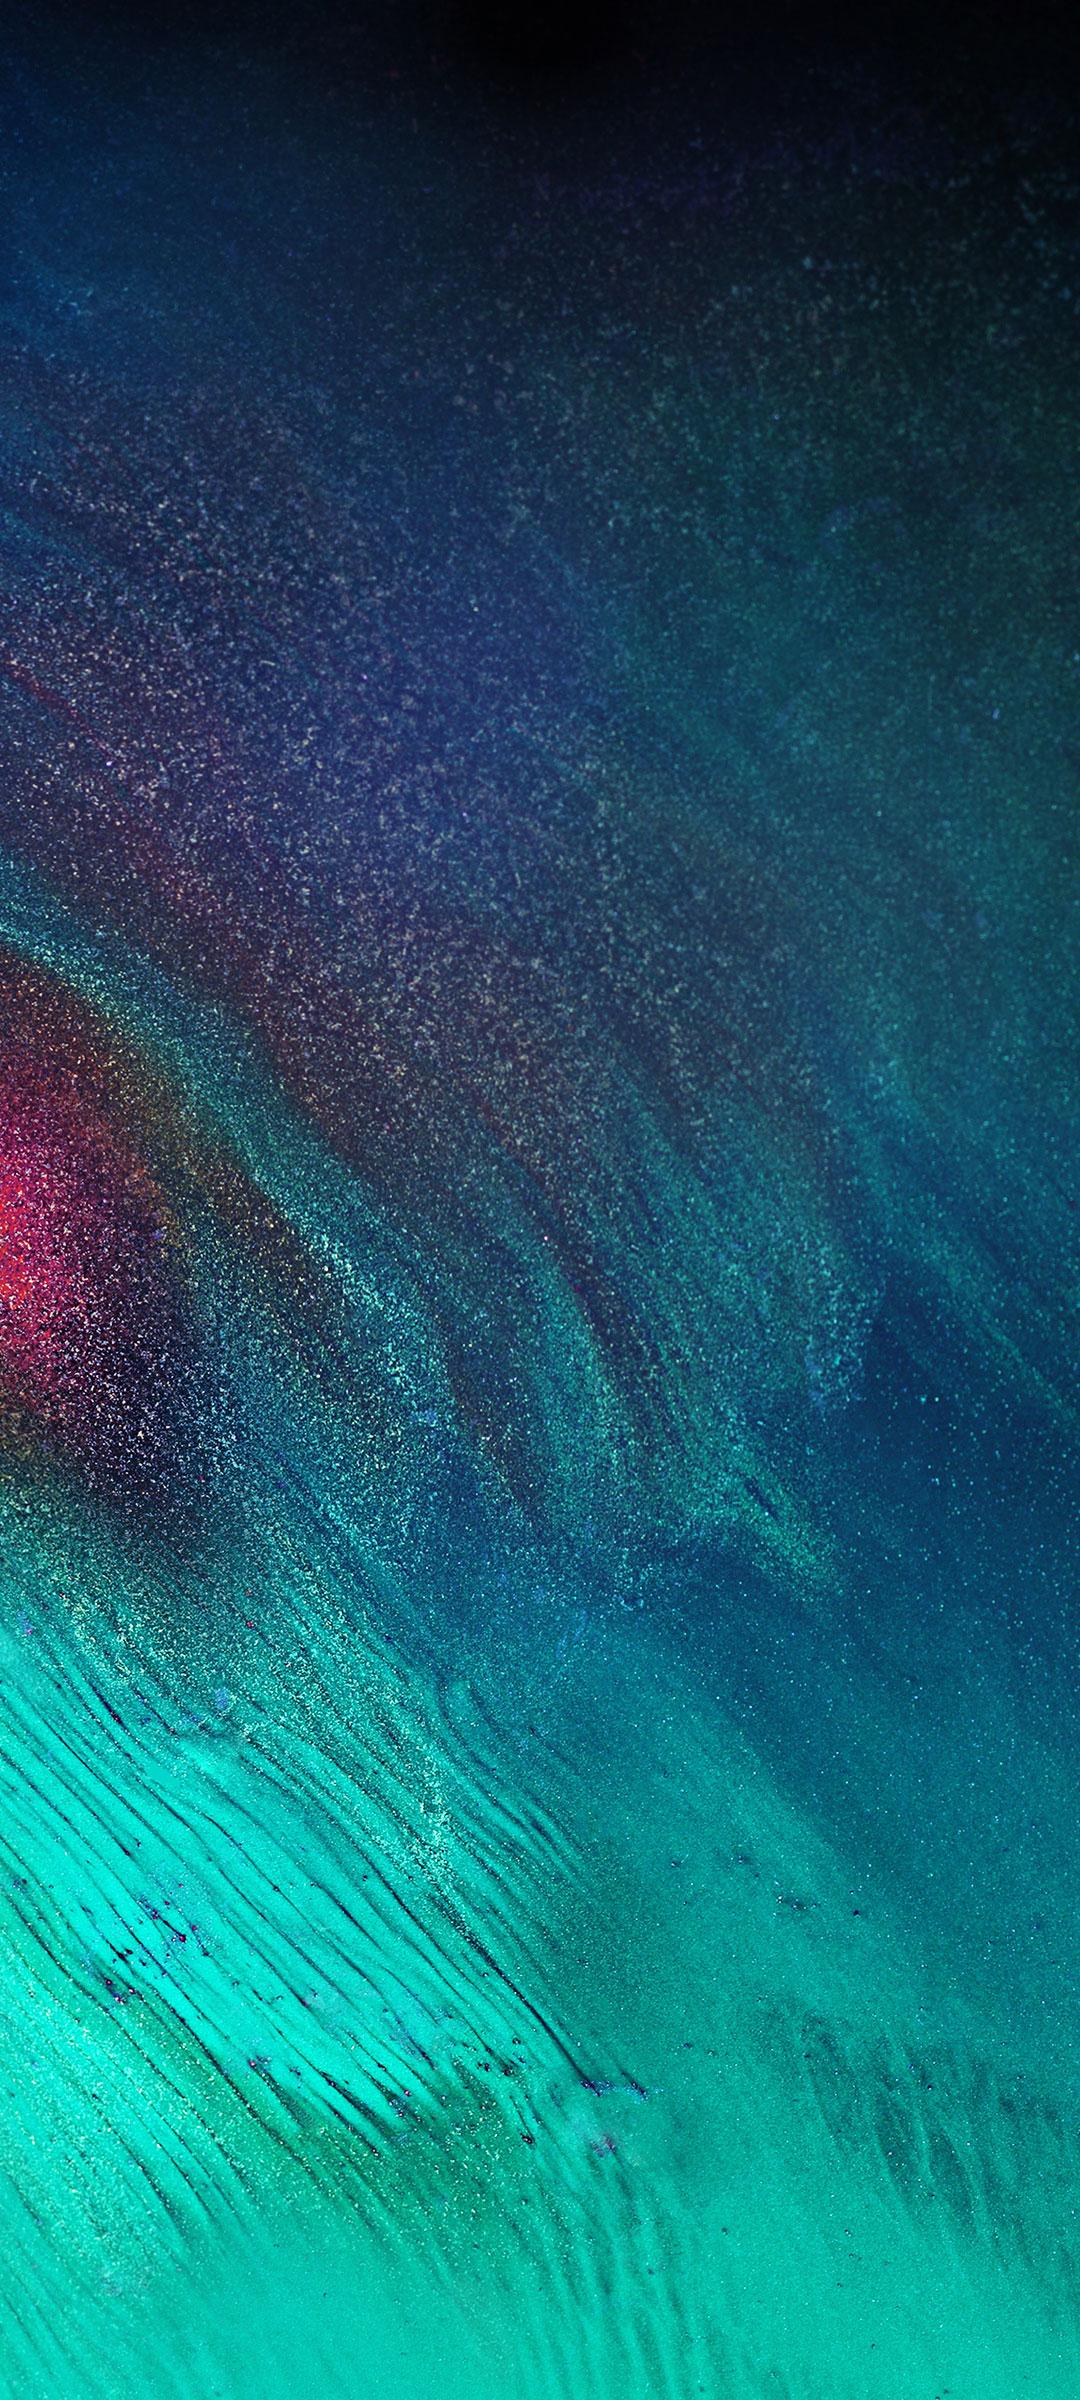 Galaxy A10s Wallpapers - Wallpaper Cave